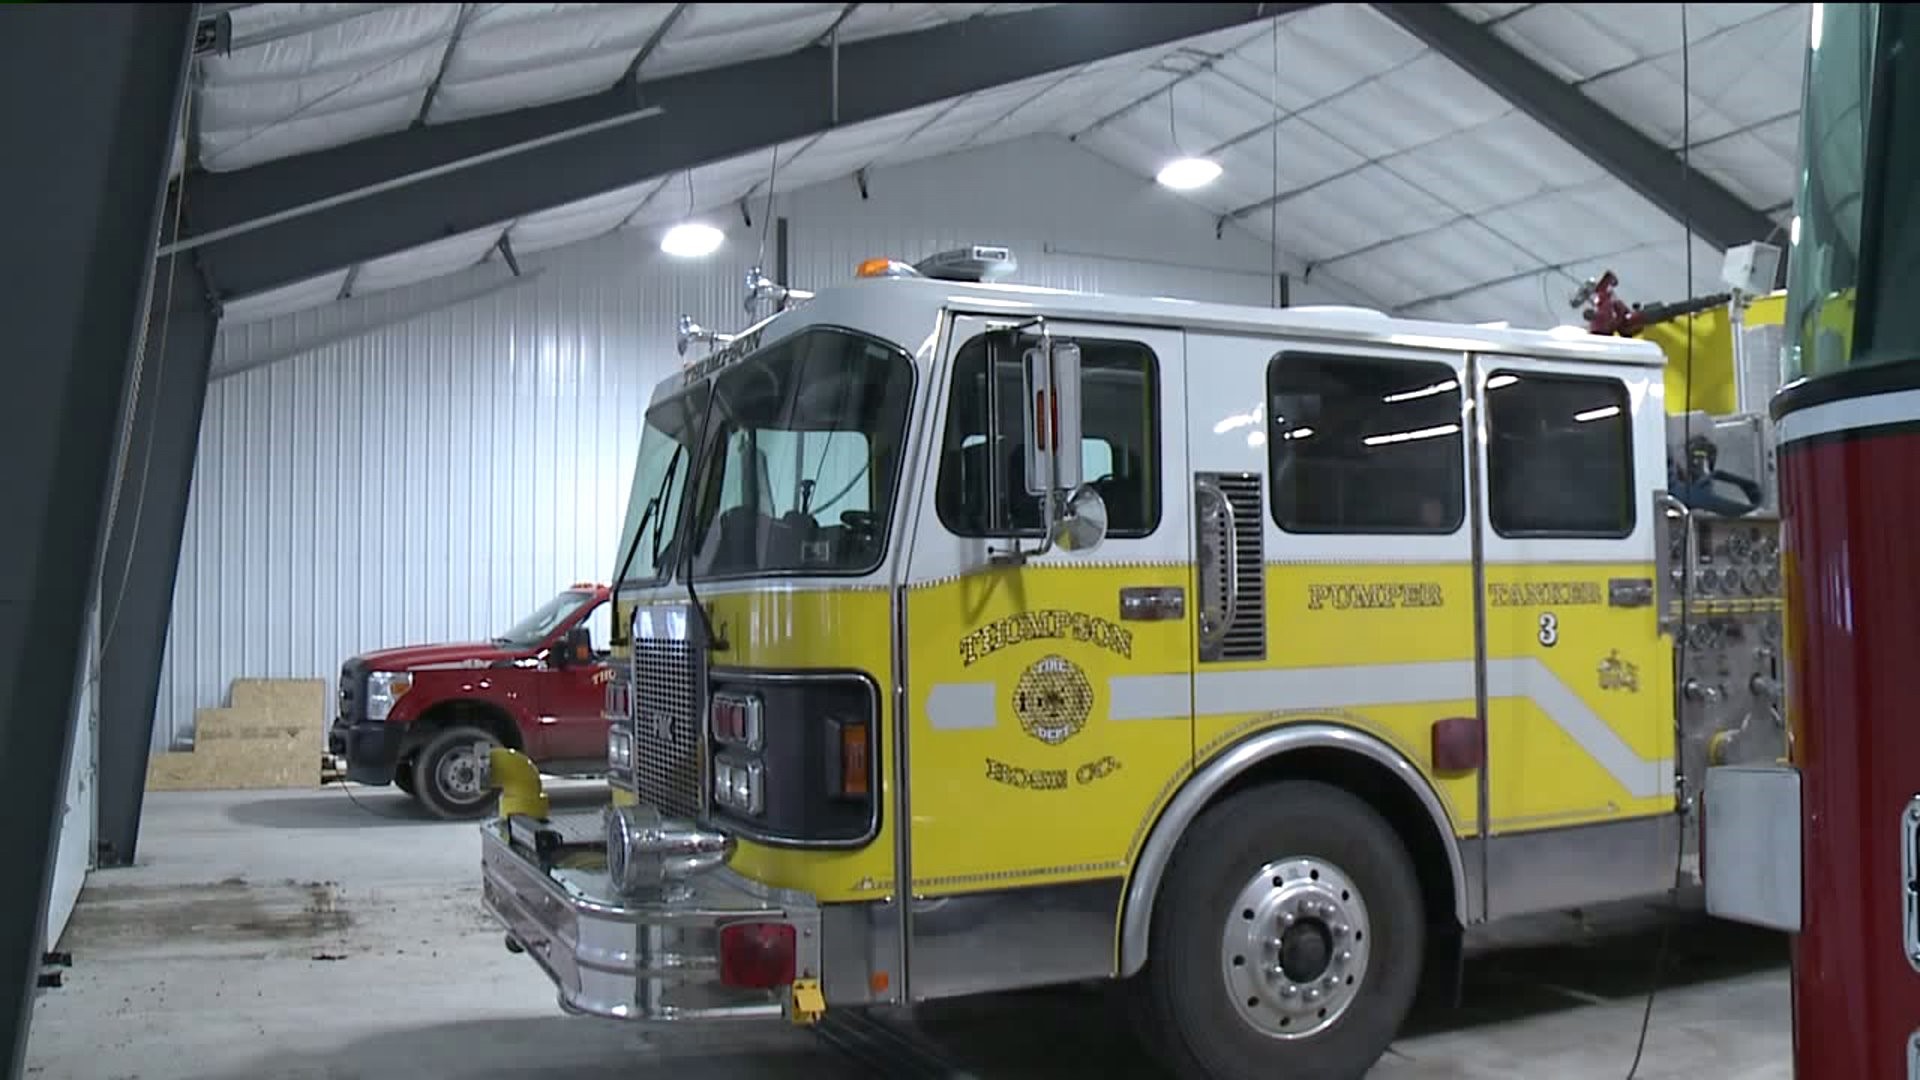 Susquehanna County Fire Company Says It Was Scammed